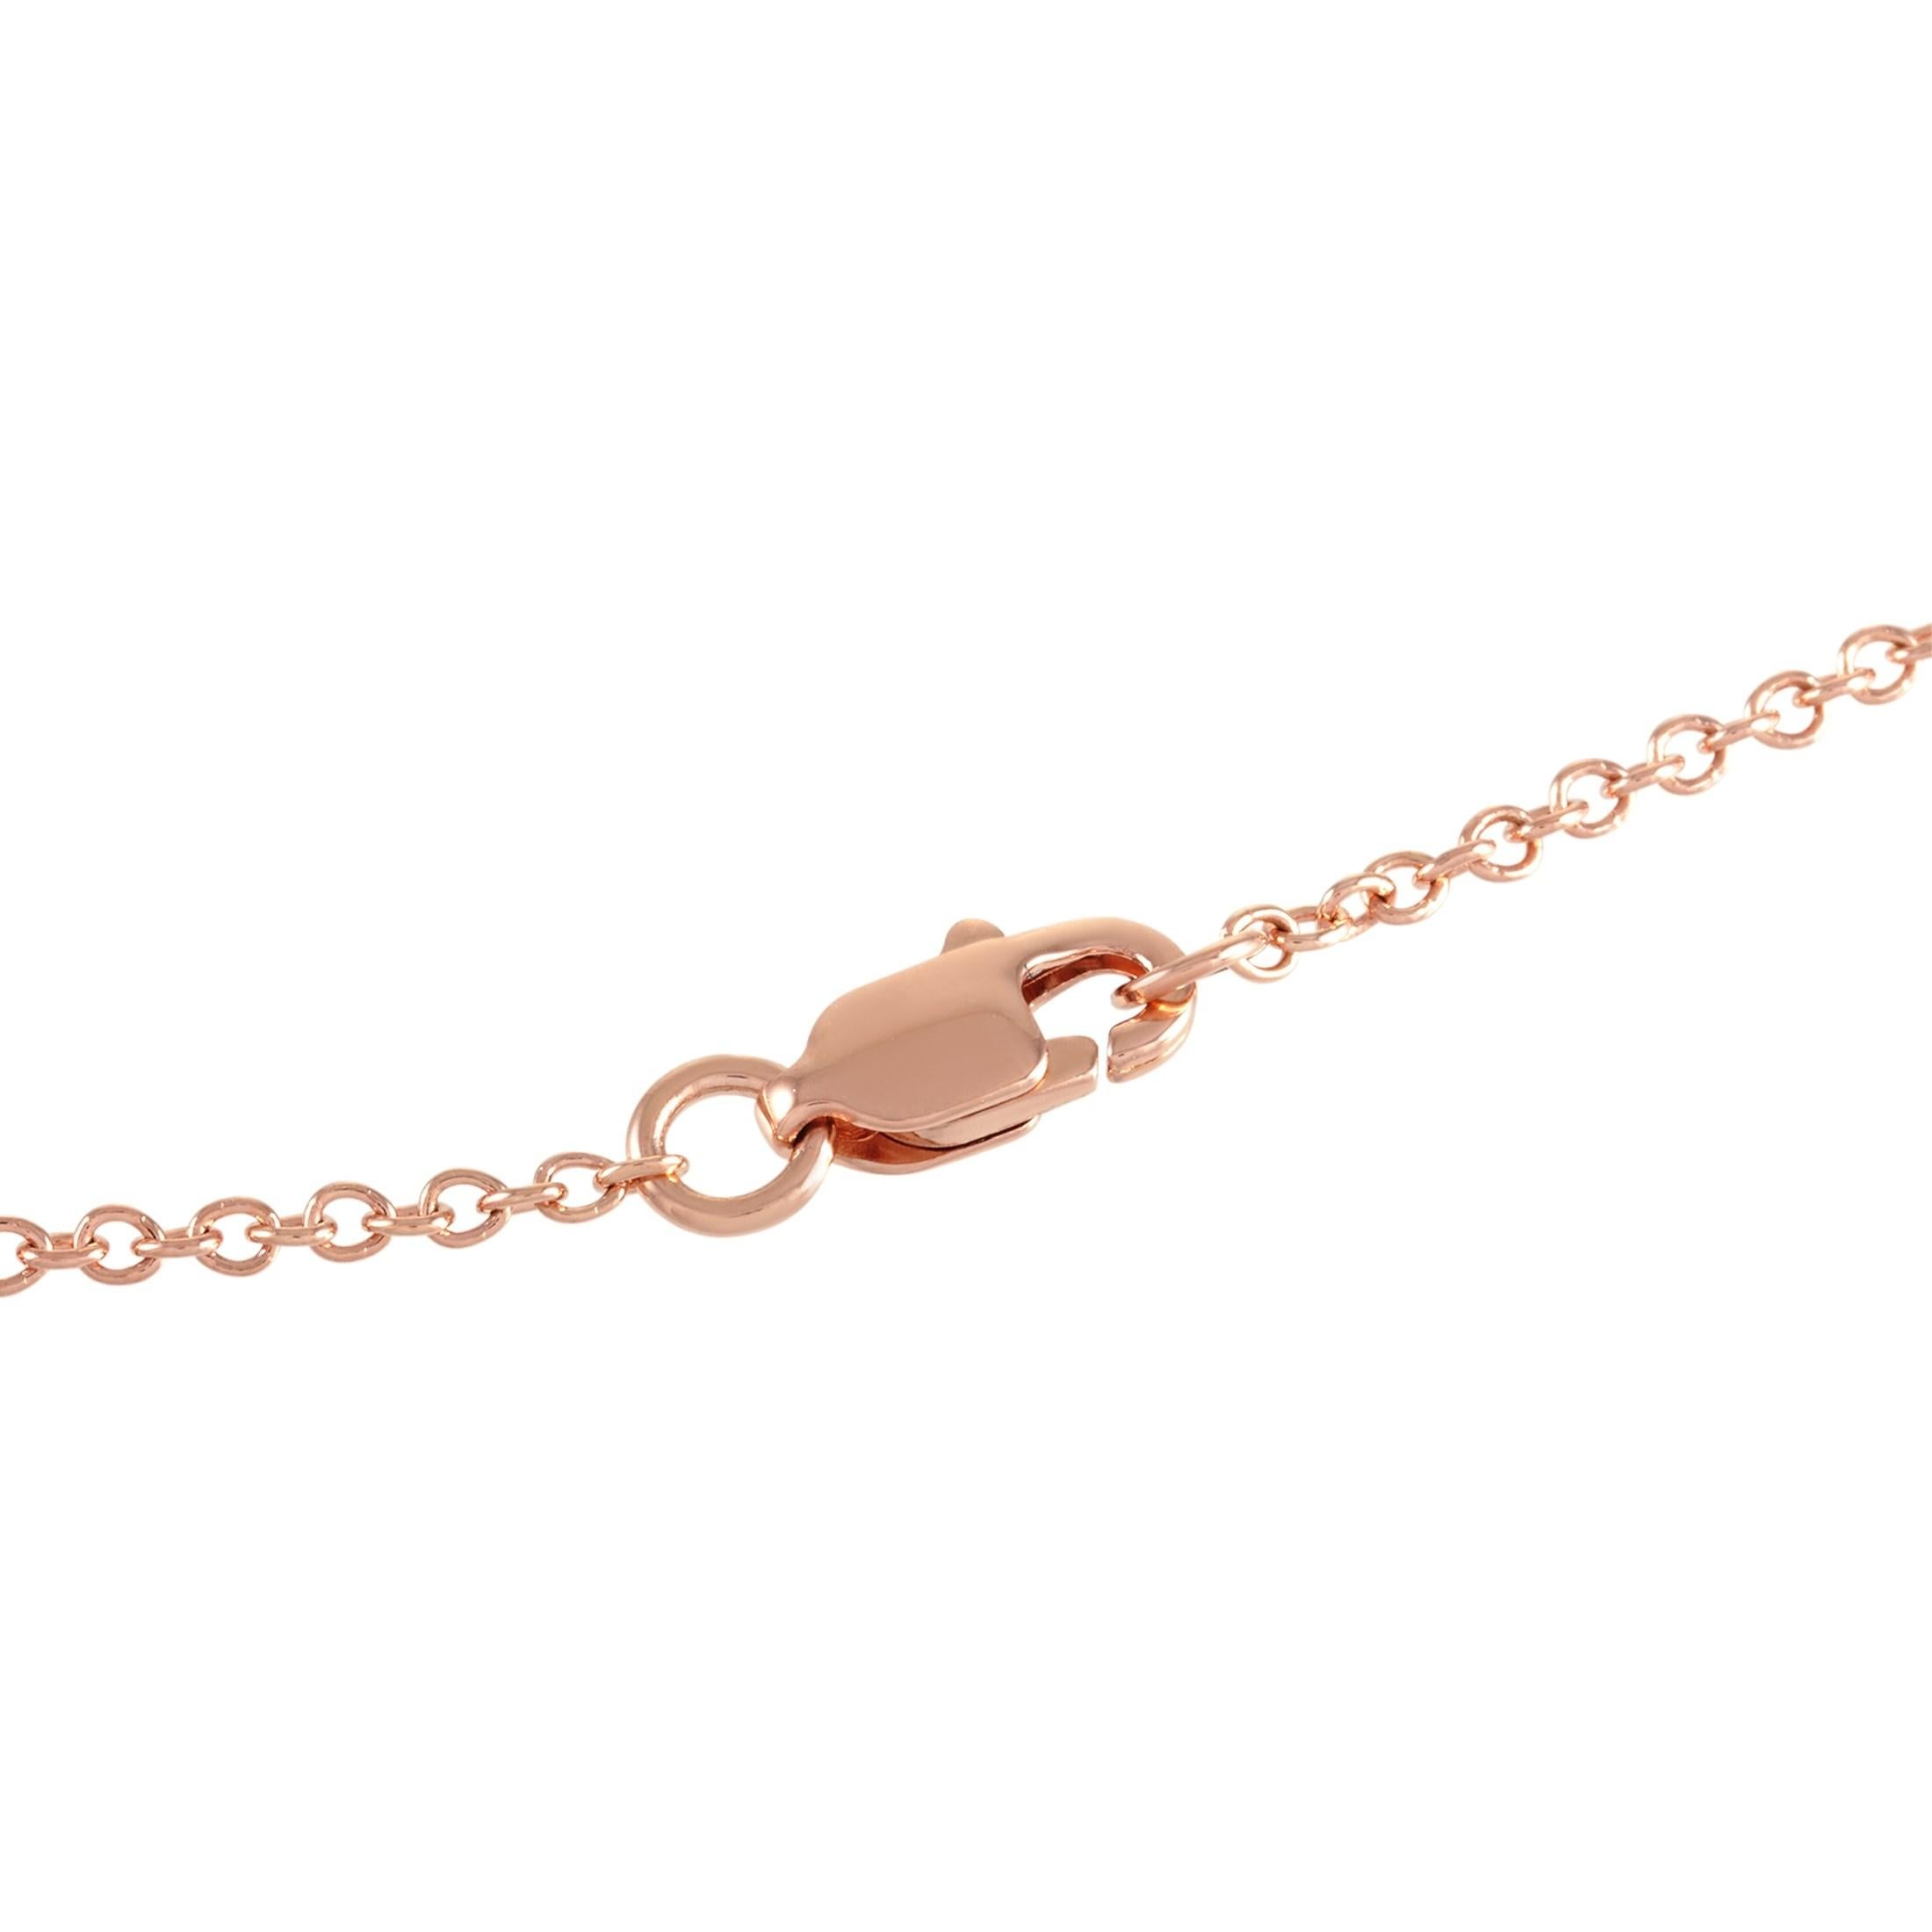 LB Exclusive 14K Rose Gold 0.37 Ct Diamond Bracelet In New Condition For Sale In Southampton, PA